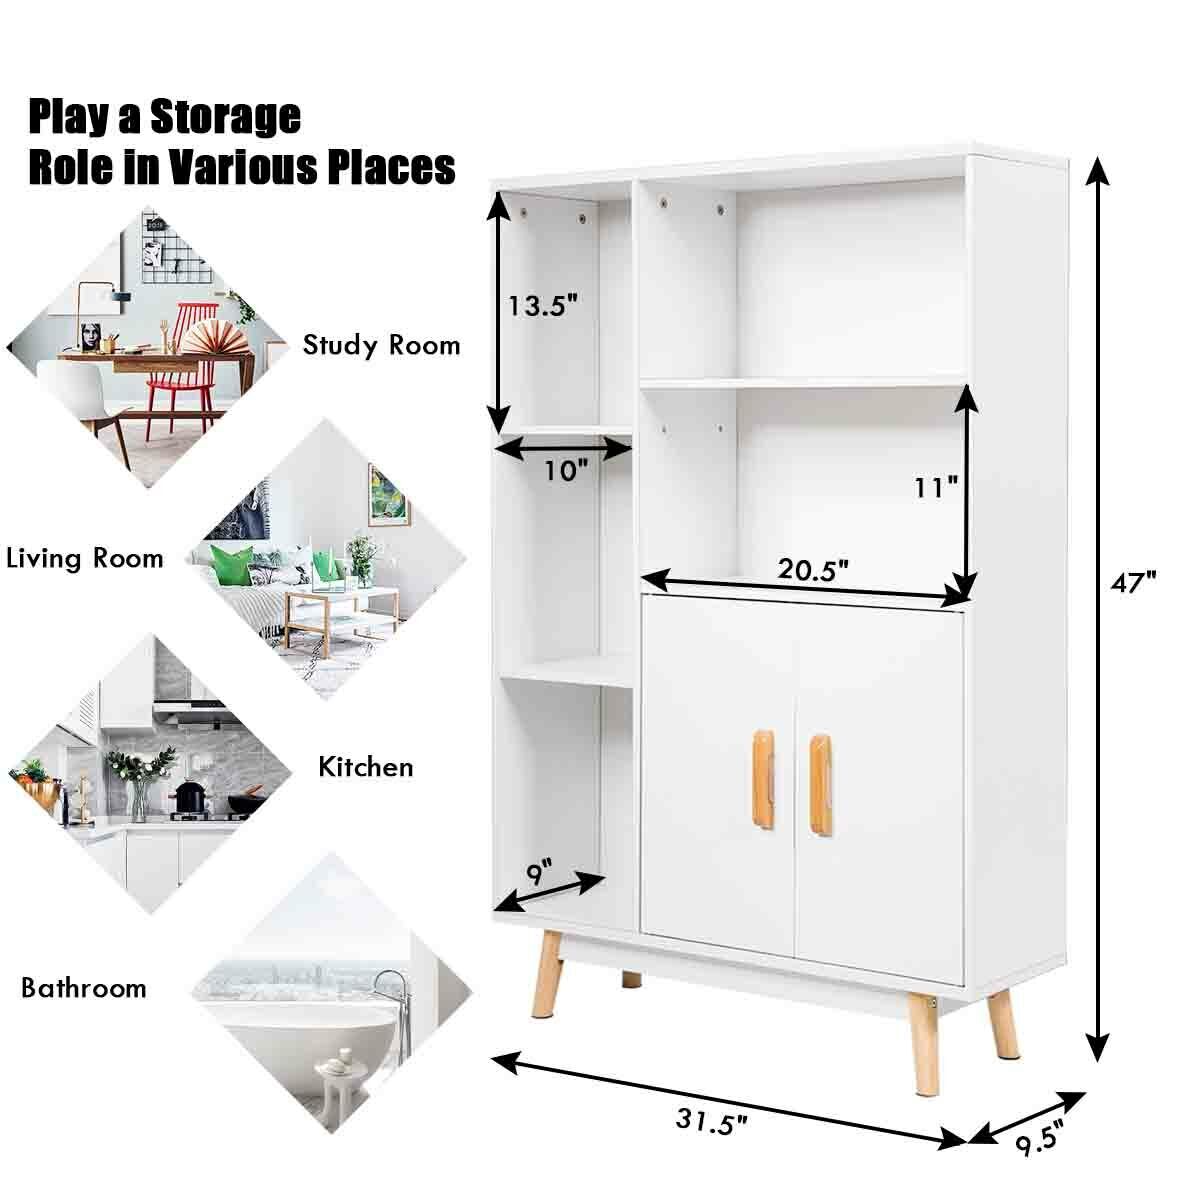 Storage Cabinet With Doors And Shelves - Kitchen Storage Cabinets